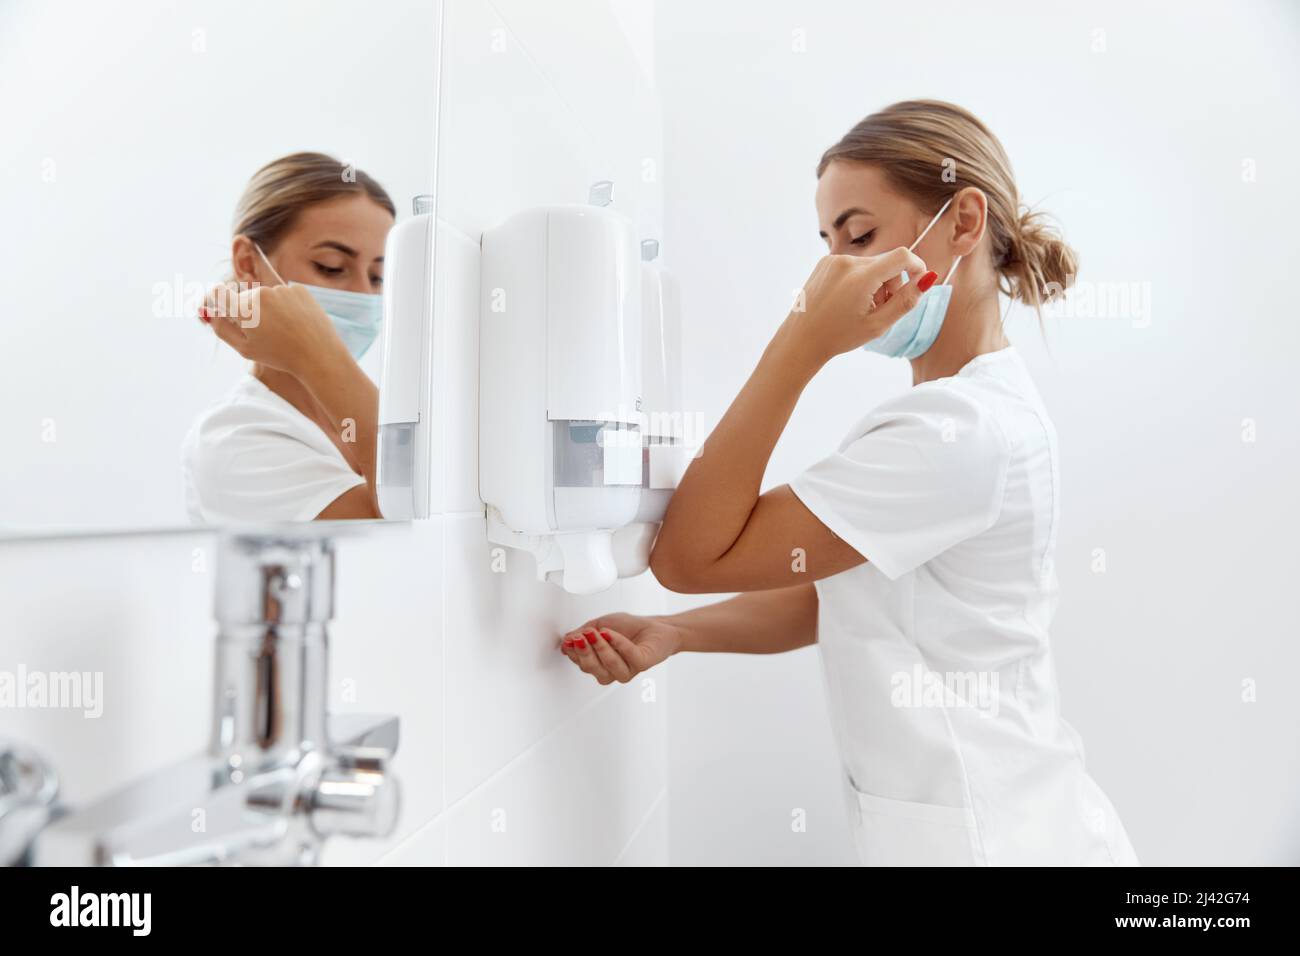 Surgeon washing hands before operating in hospital. Health care and hygiene concept Stock Photo